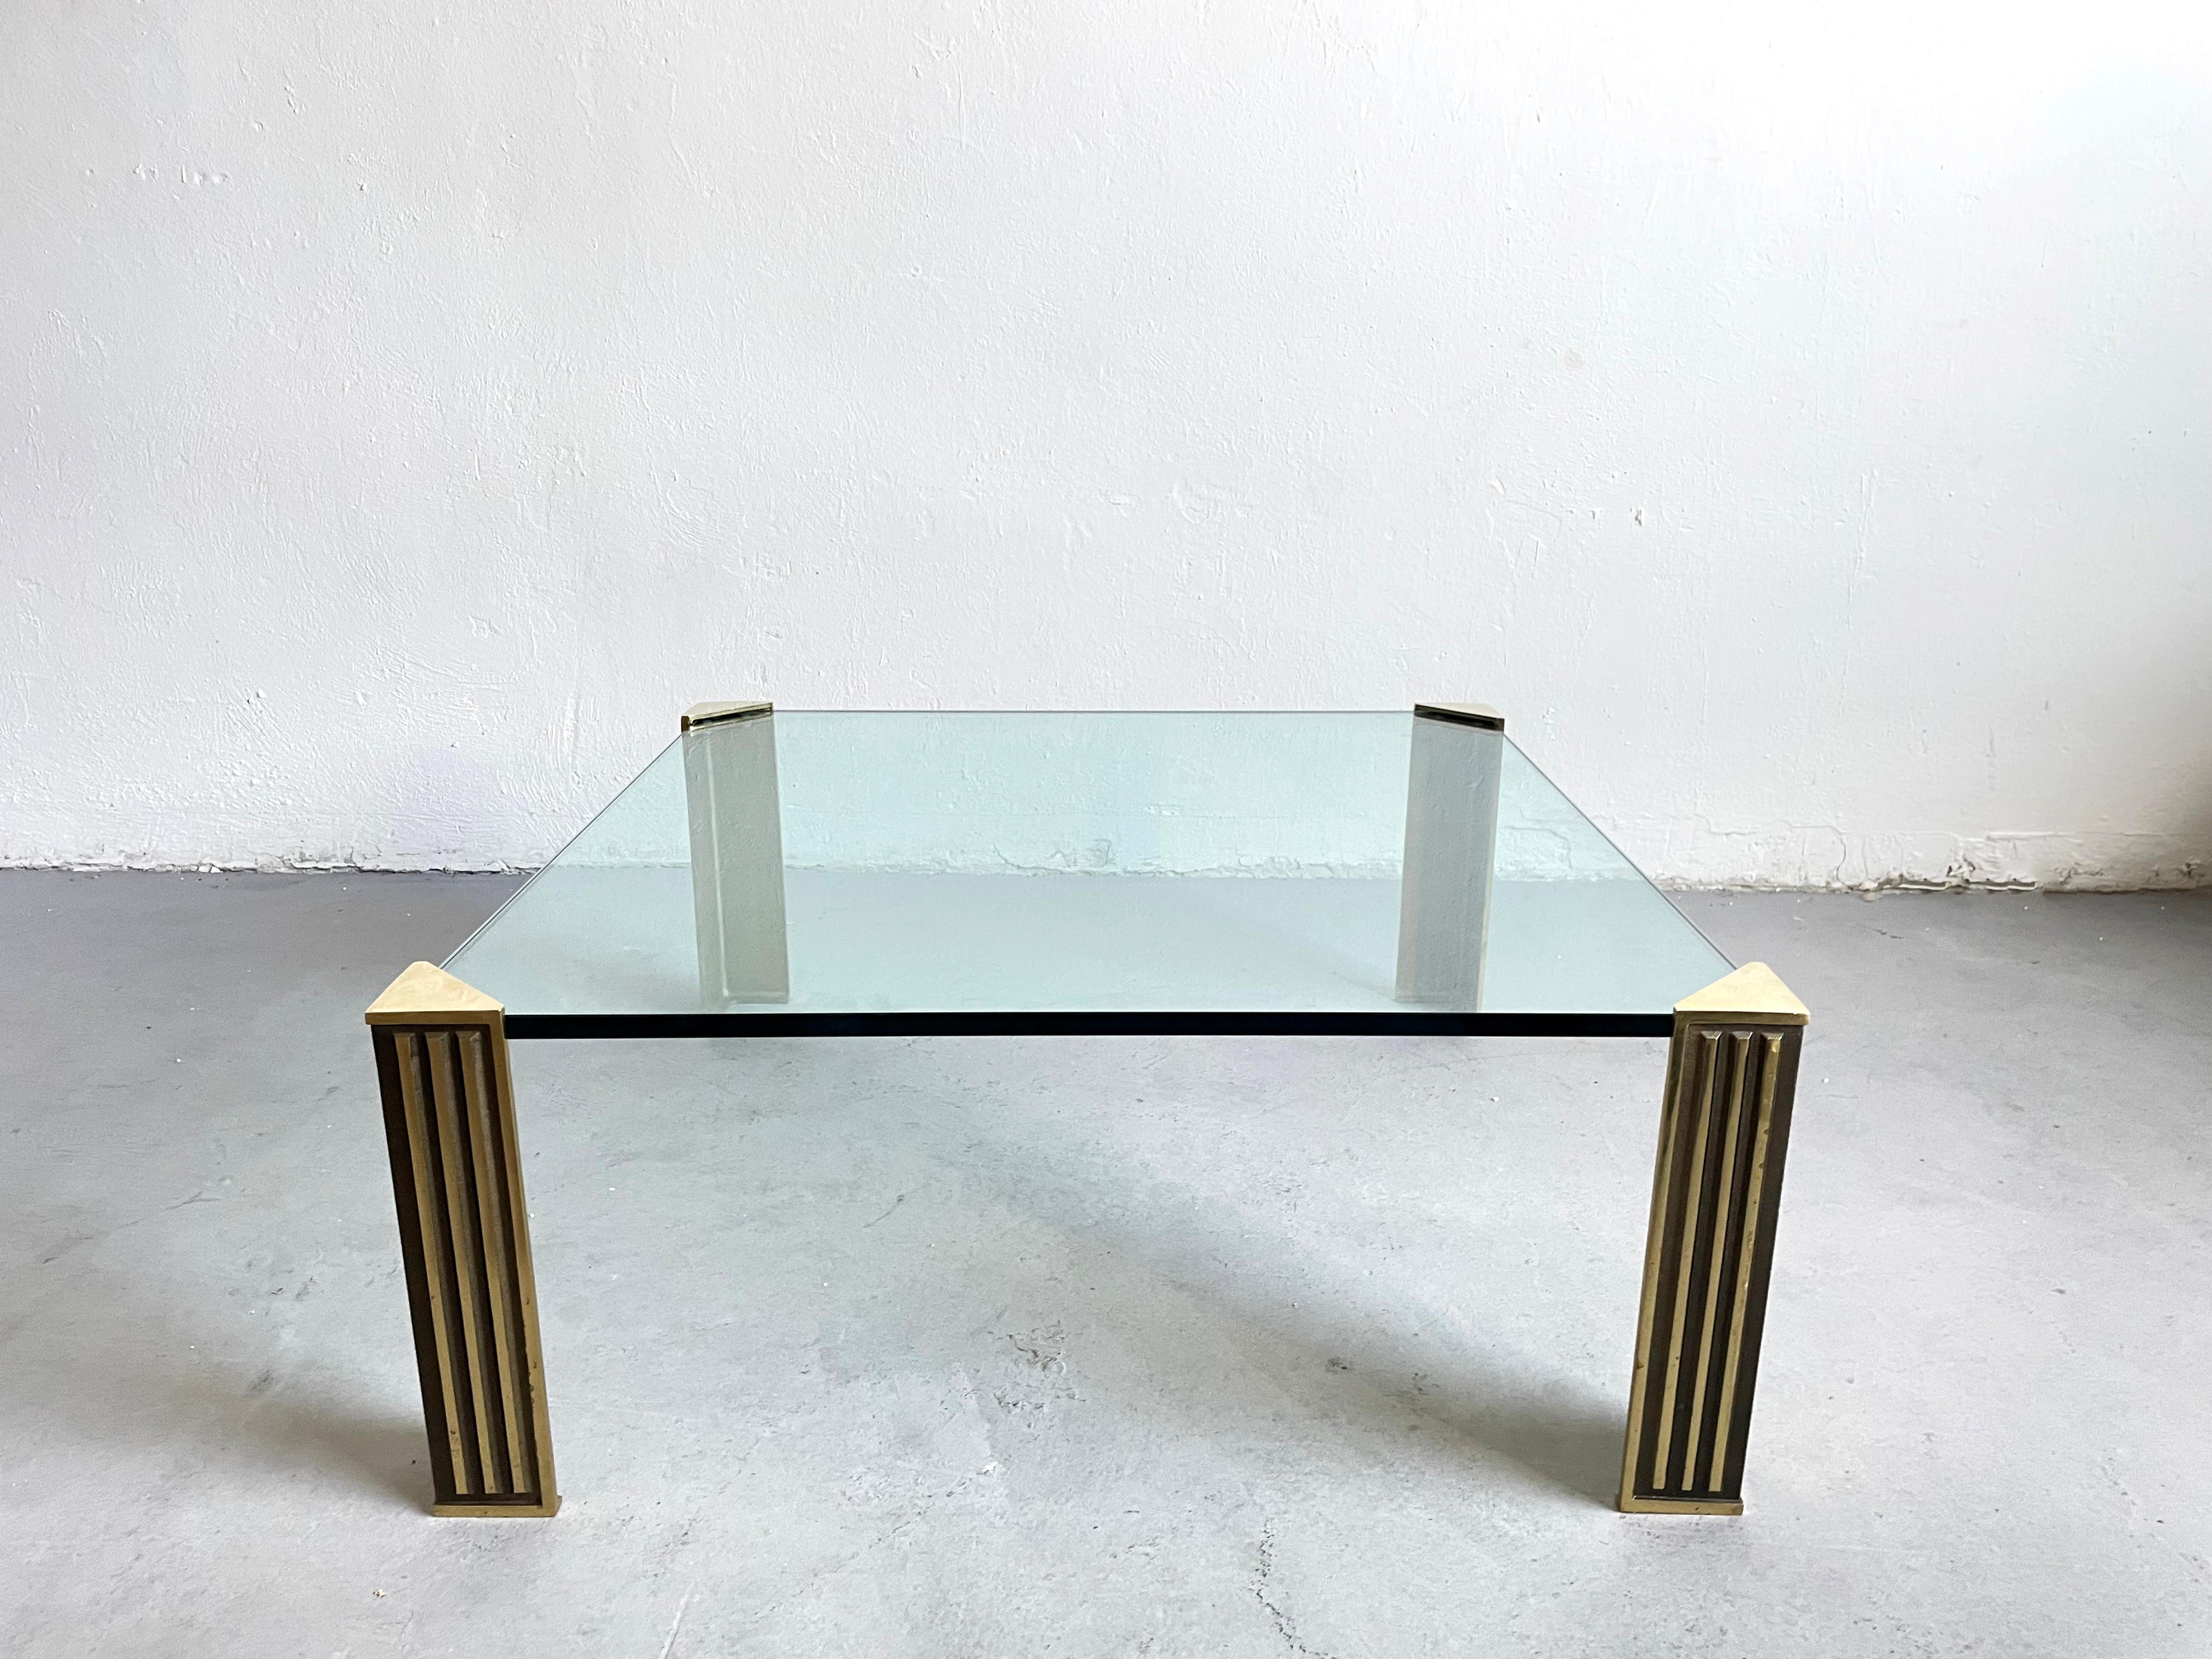 European Hollywood Regency Glass and Brass Coffee Table in style of Peter Ghyczy, 1970s For Sale